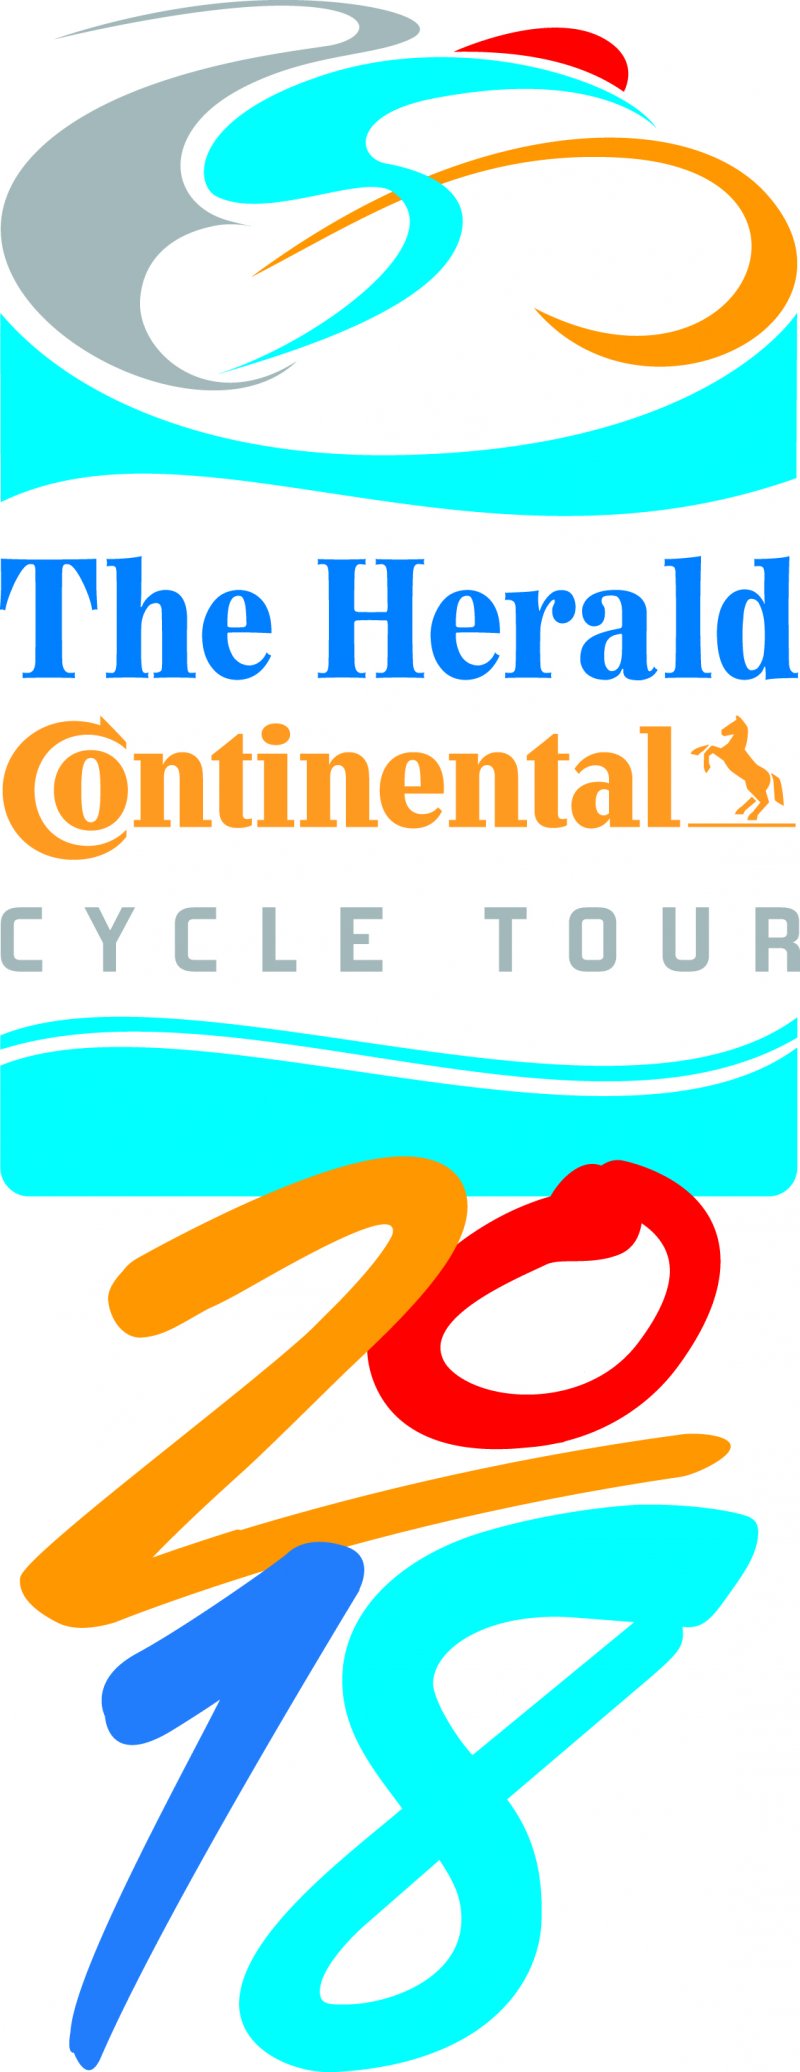 The Herald Continental Cycle Tour